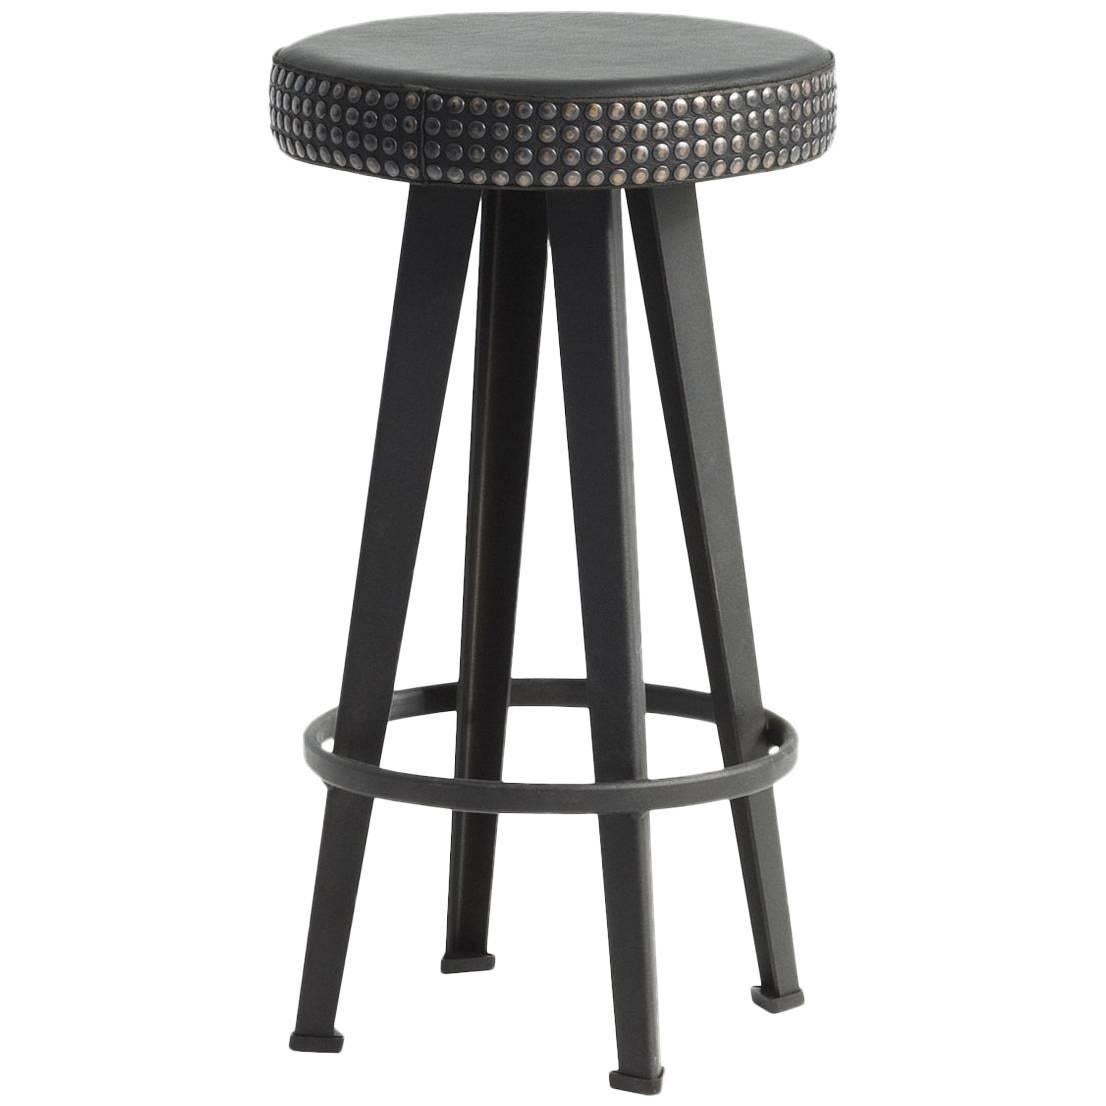 "Bar Stud" Studded Black Leather and Steel Base Low Stool by Moroso for Diesel